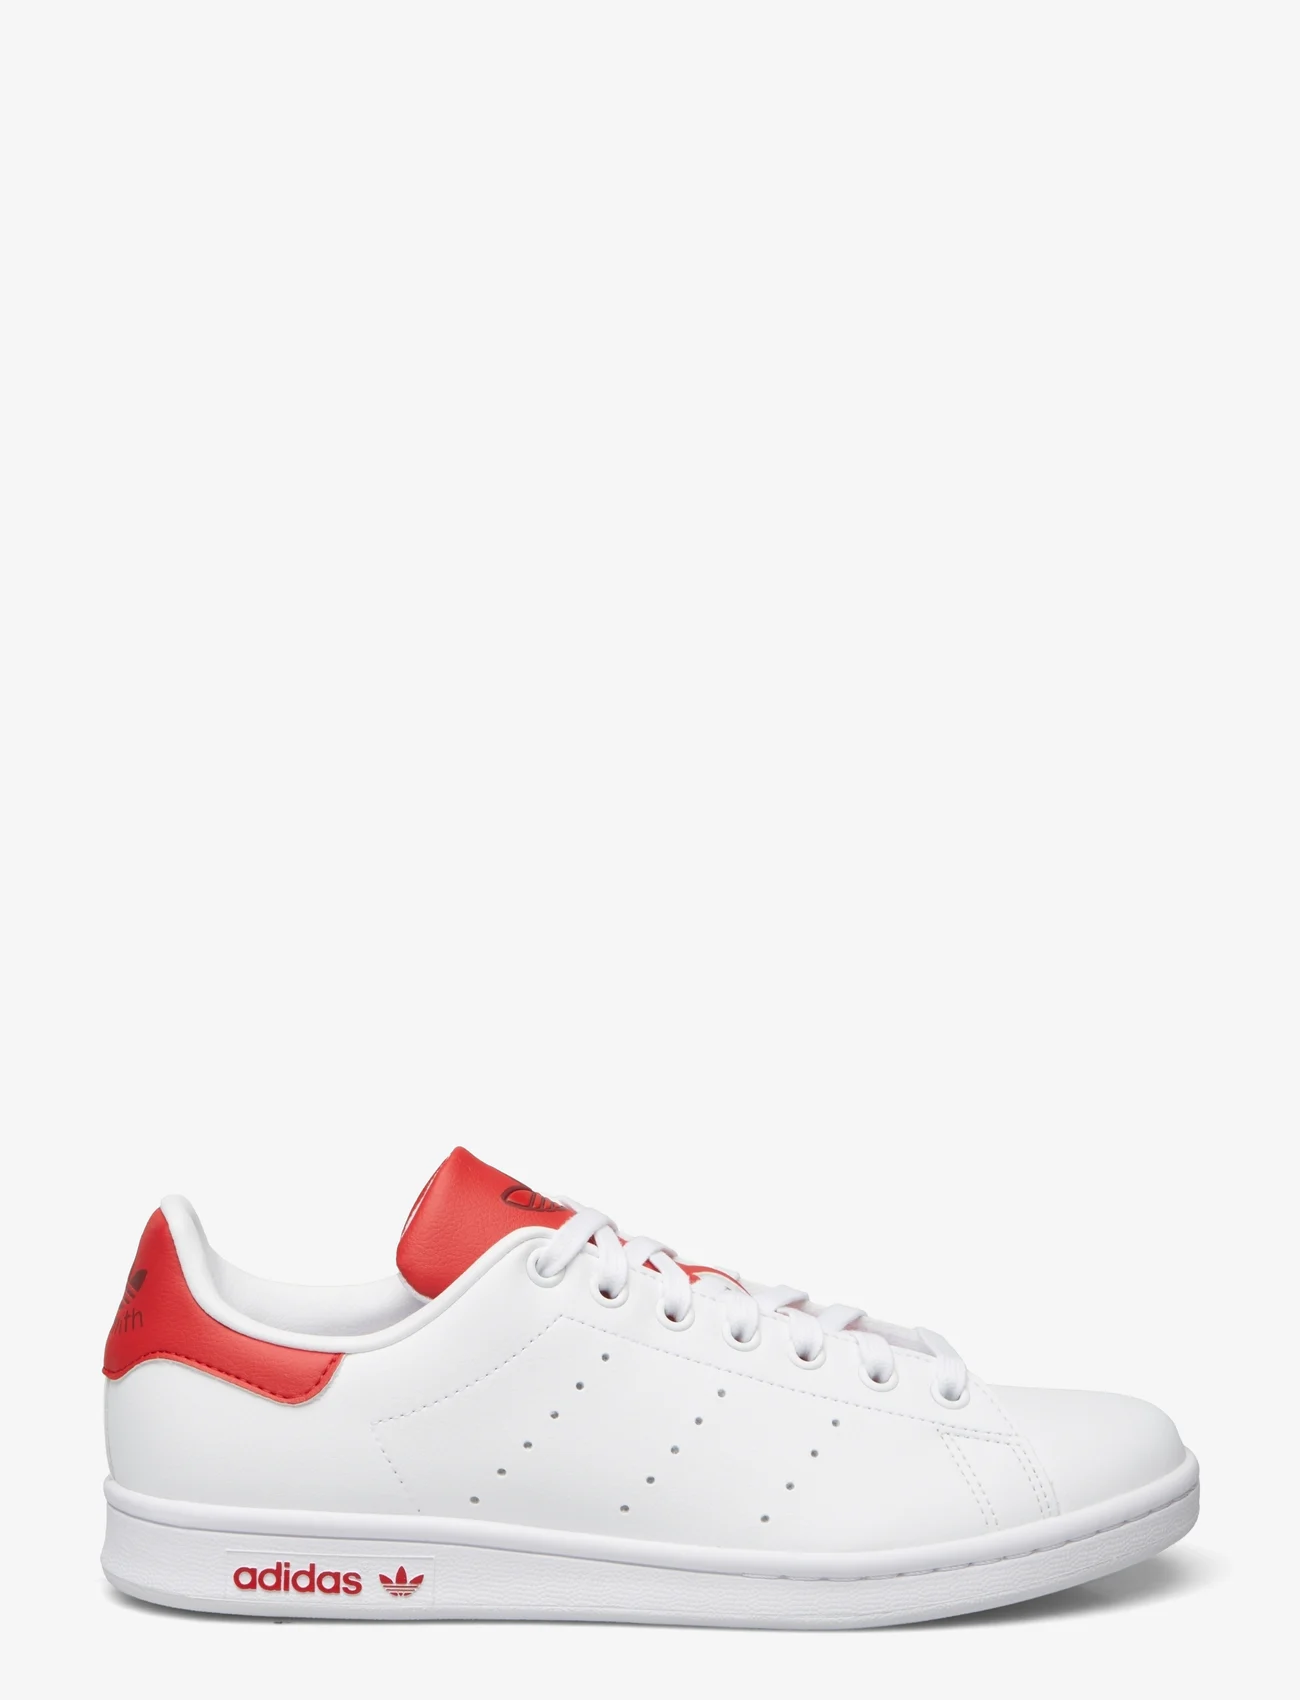 adidas Originals - STAN SMITH - laag sneakers - ftwwht/ftwwht/betsca - 1